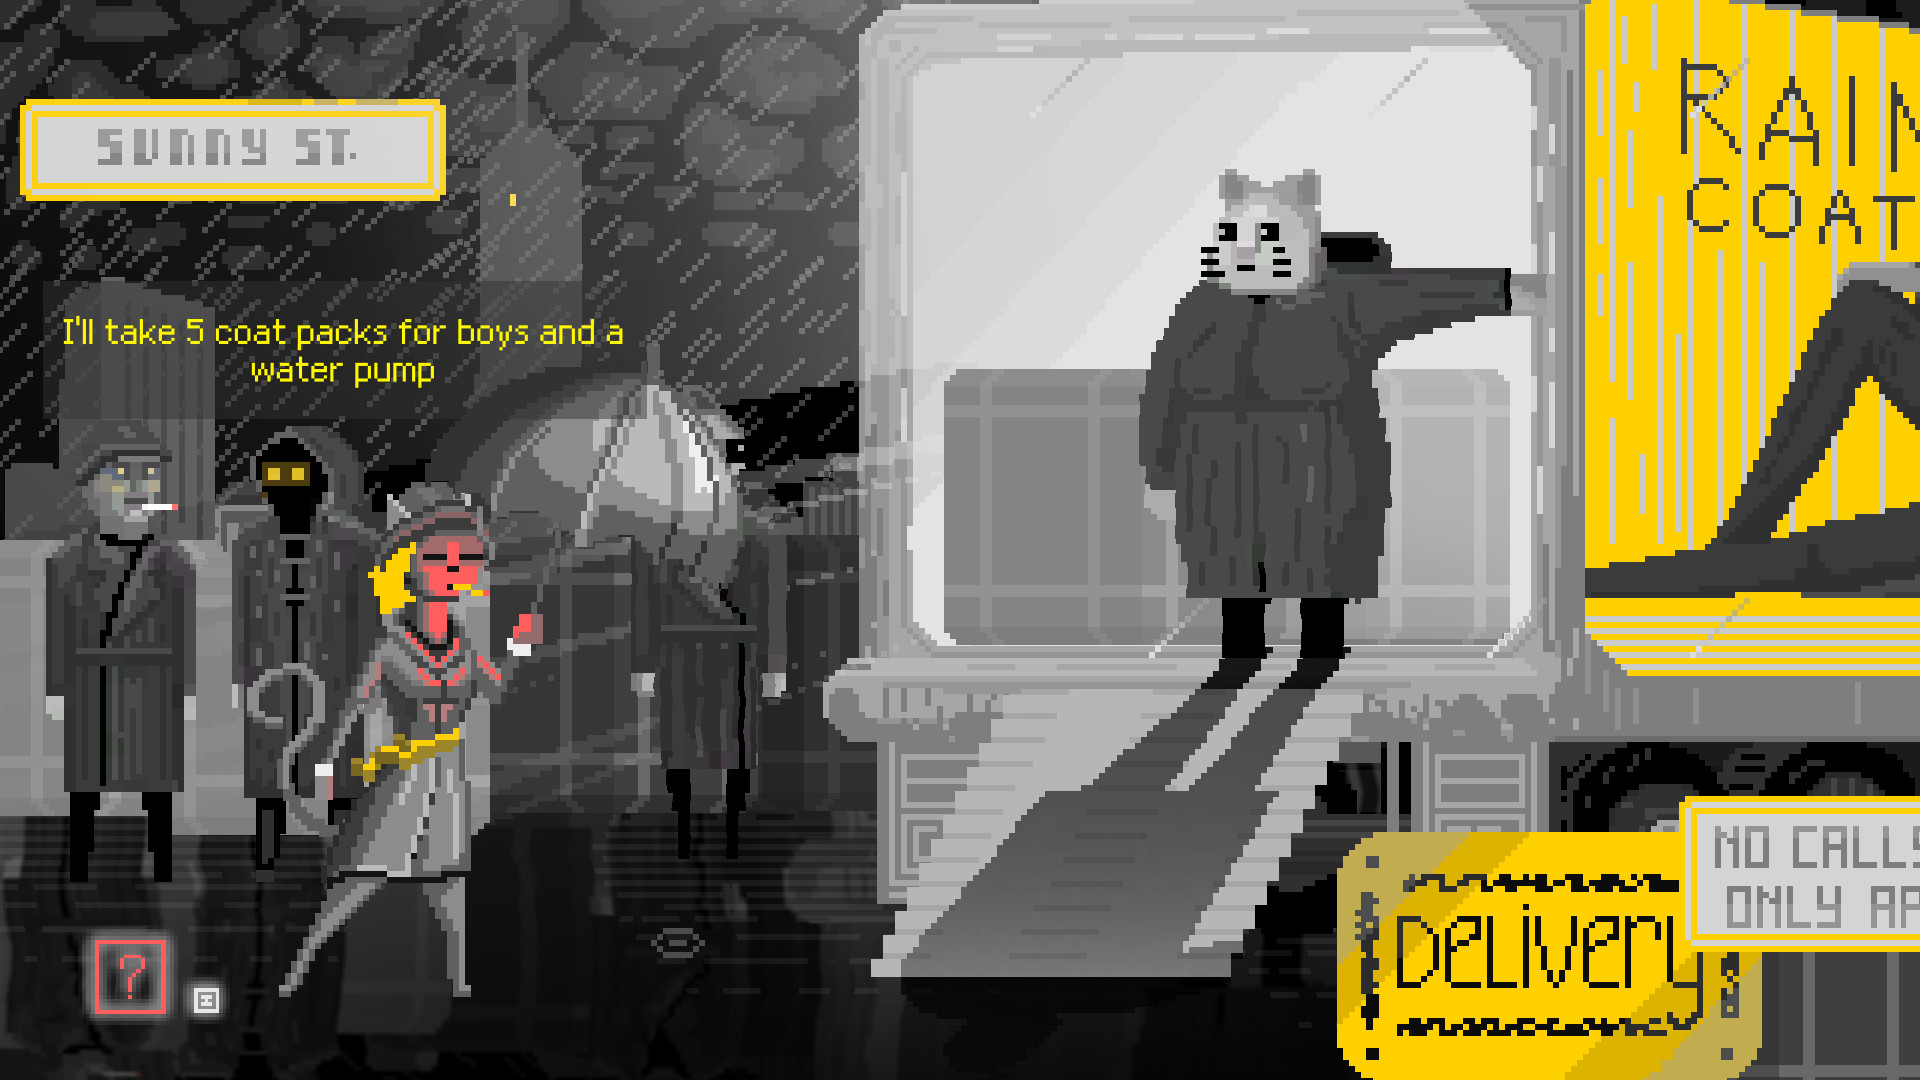 This rain will never end - noir adventure detective Free Download